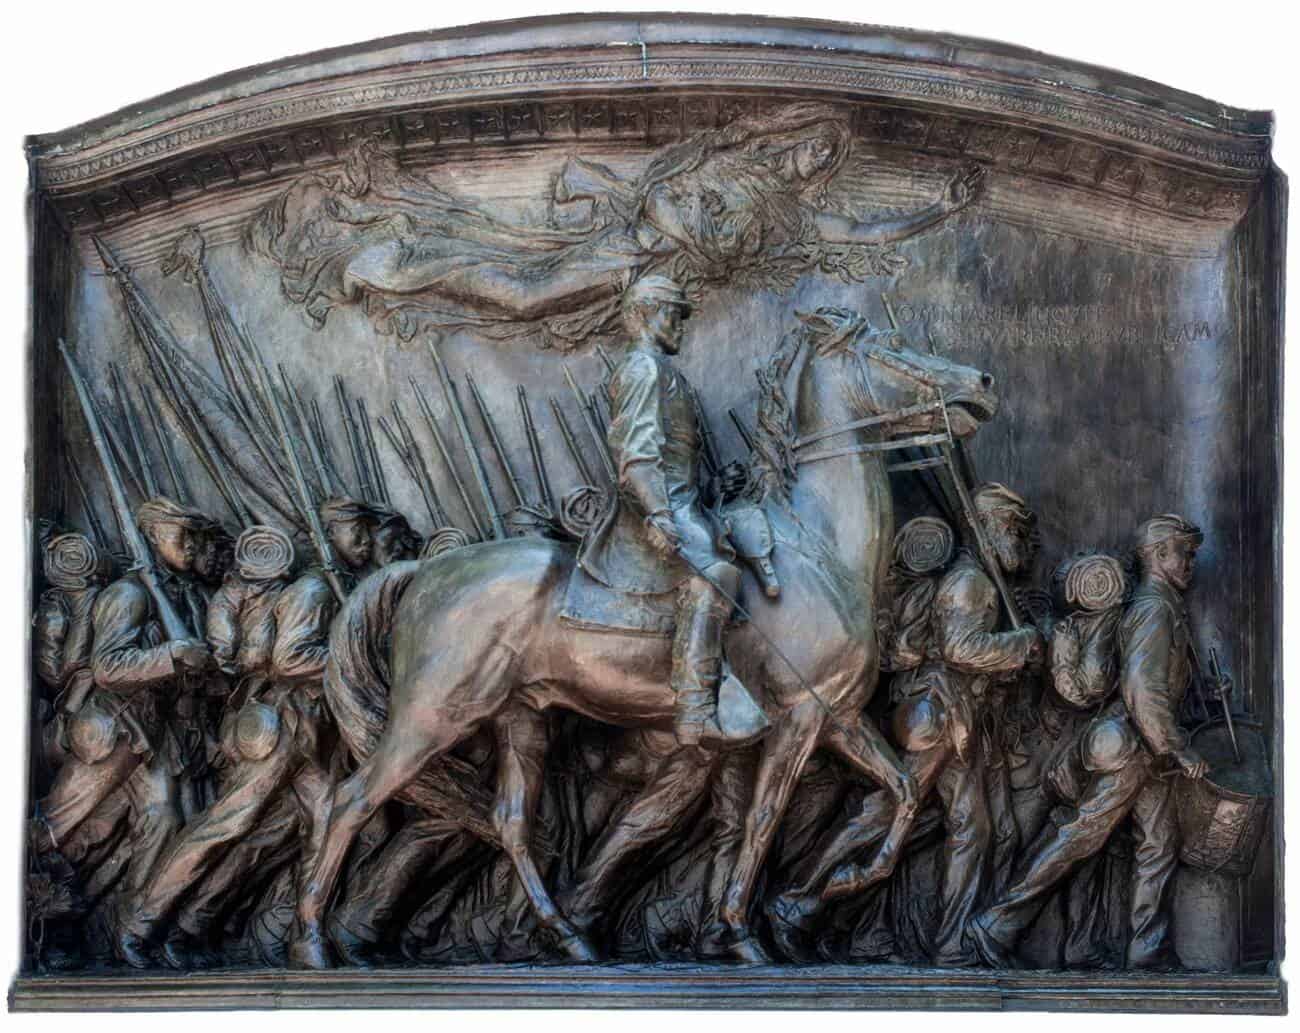 Monument to the 54th regiment African American volunteers of the Civil War in the Boston